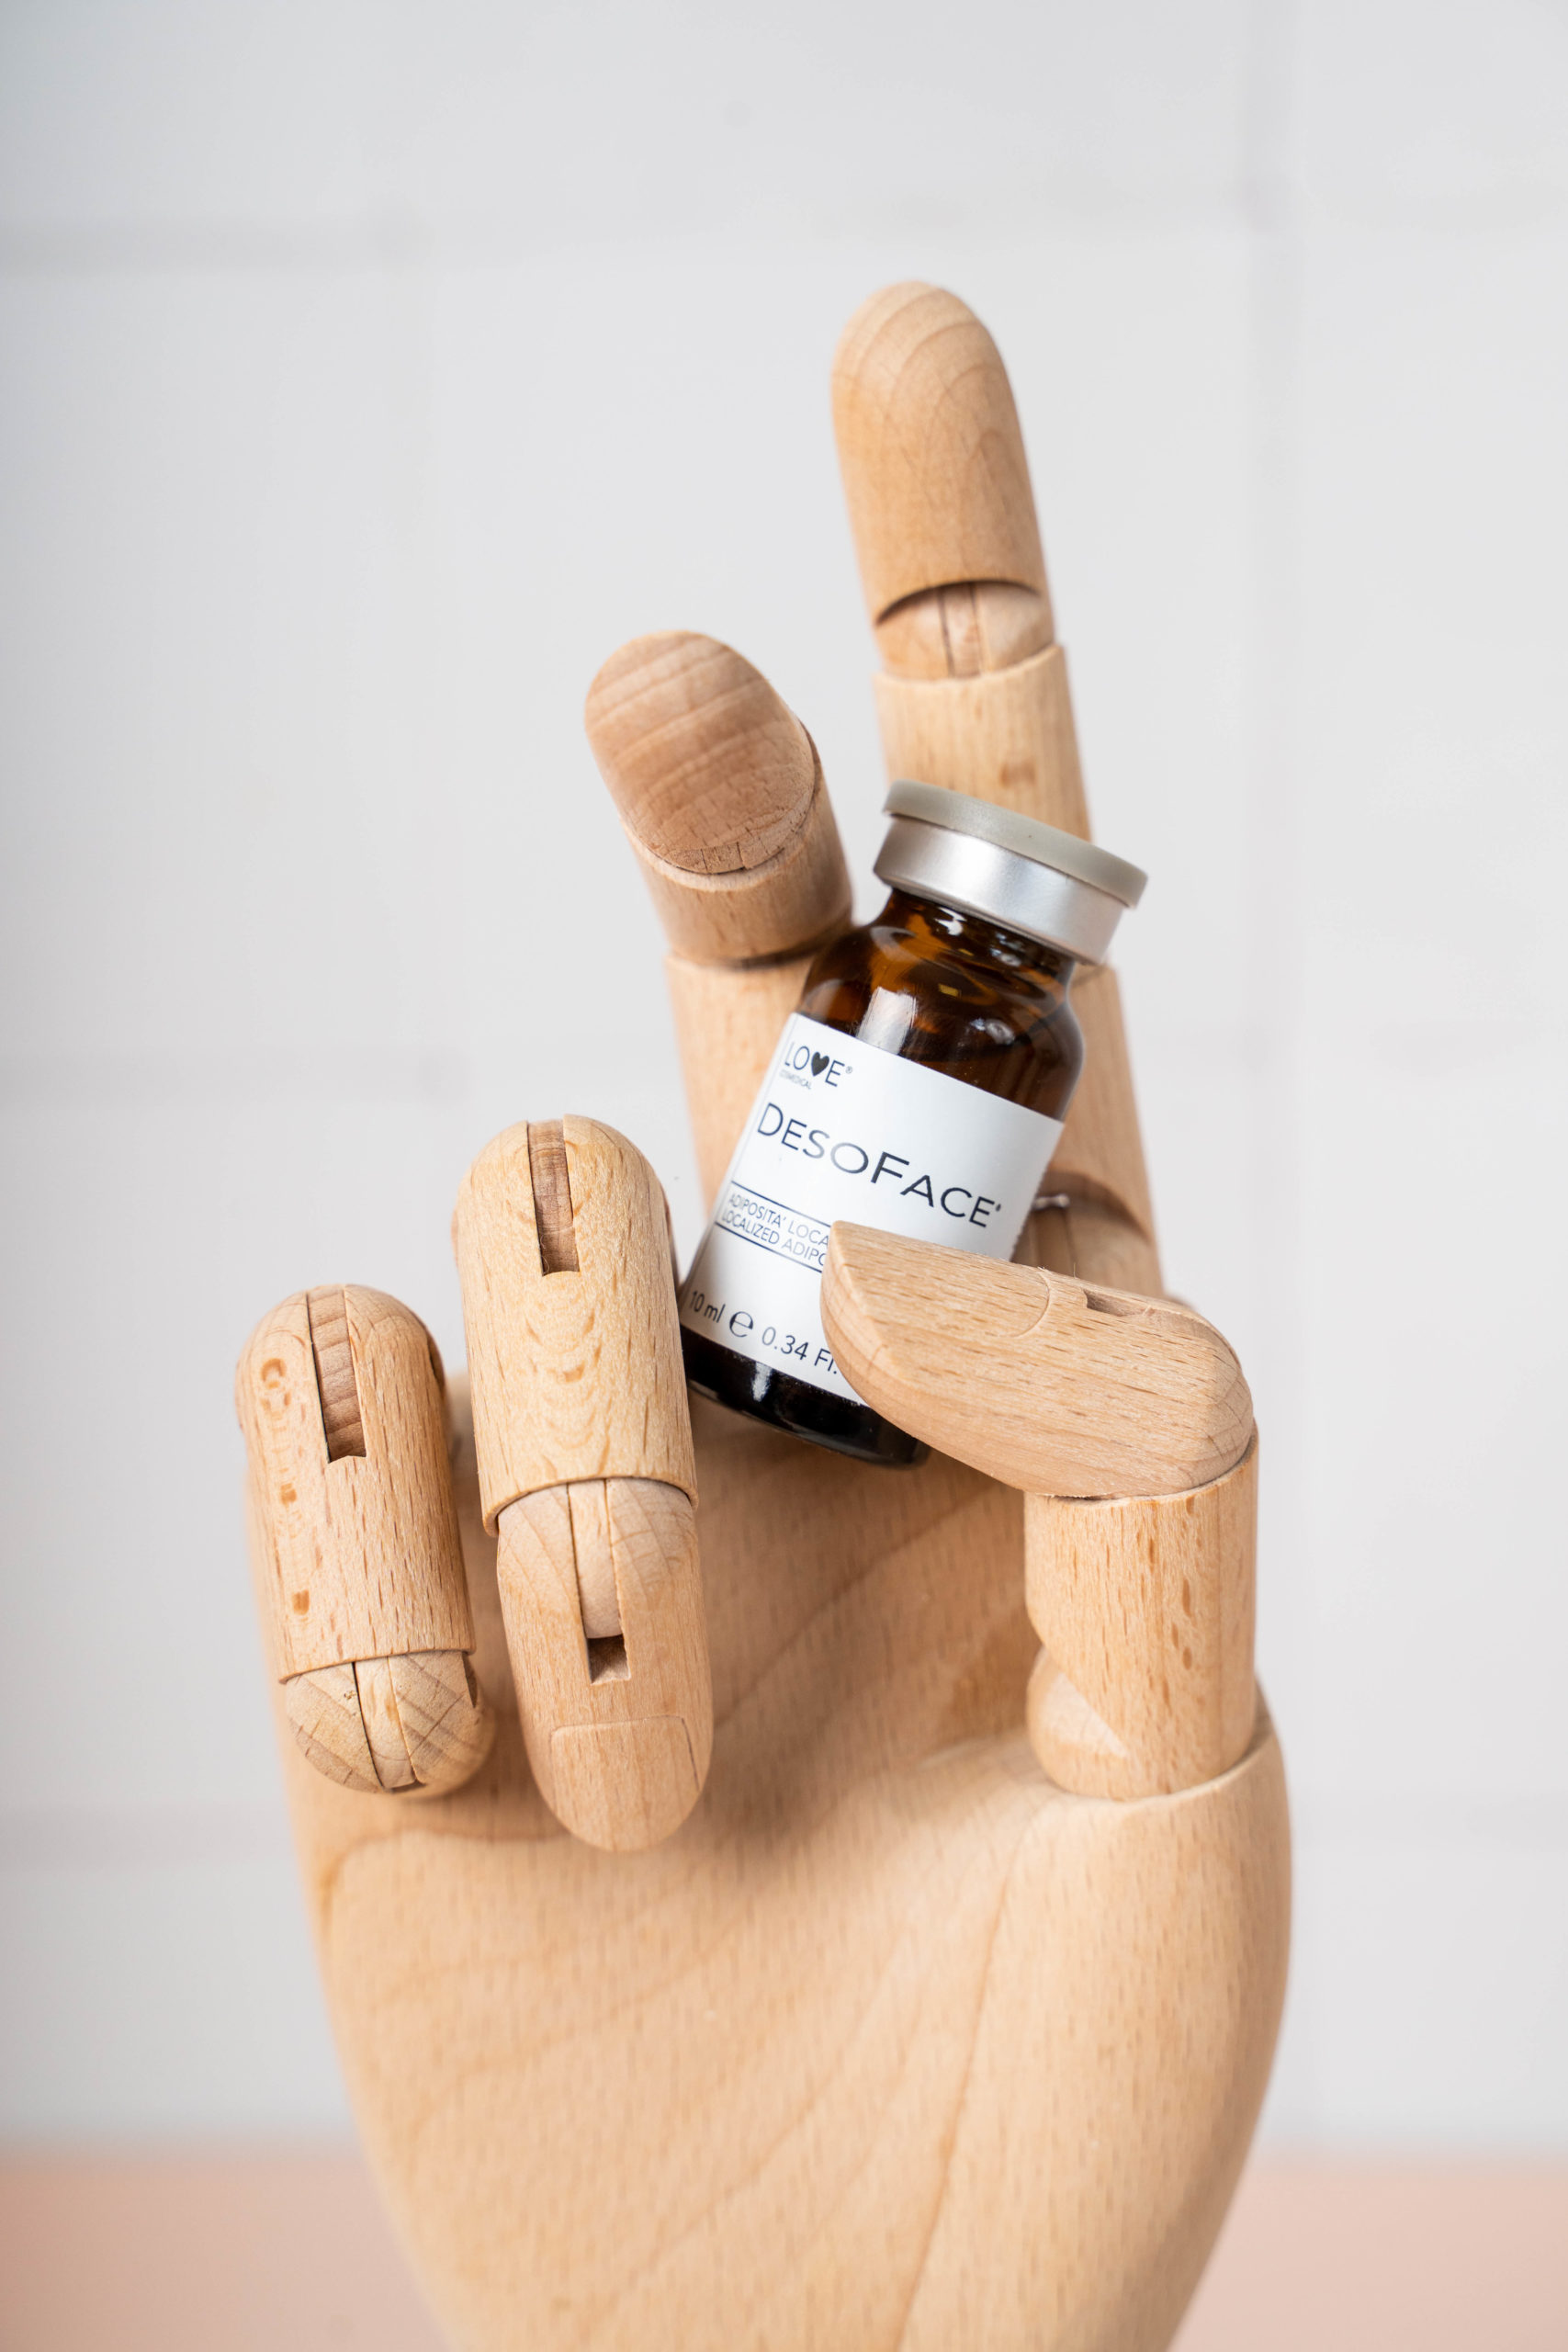 wooden hand holding up an aesthetics product